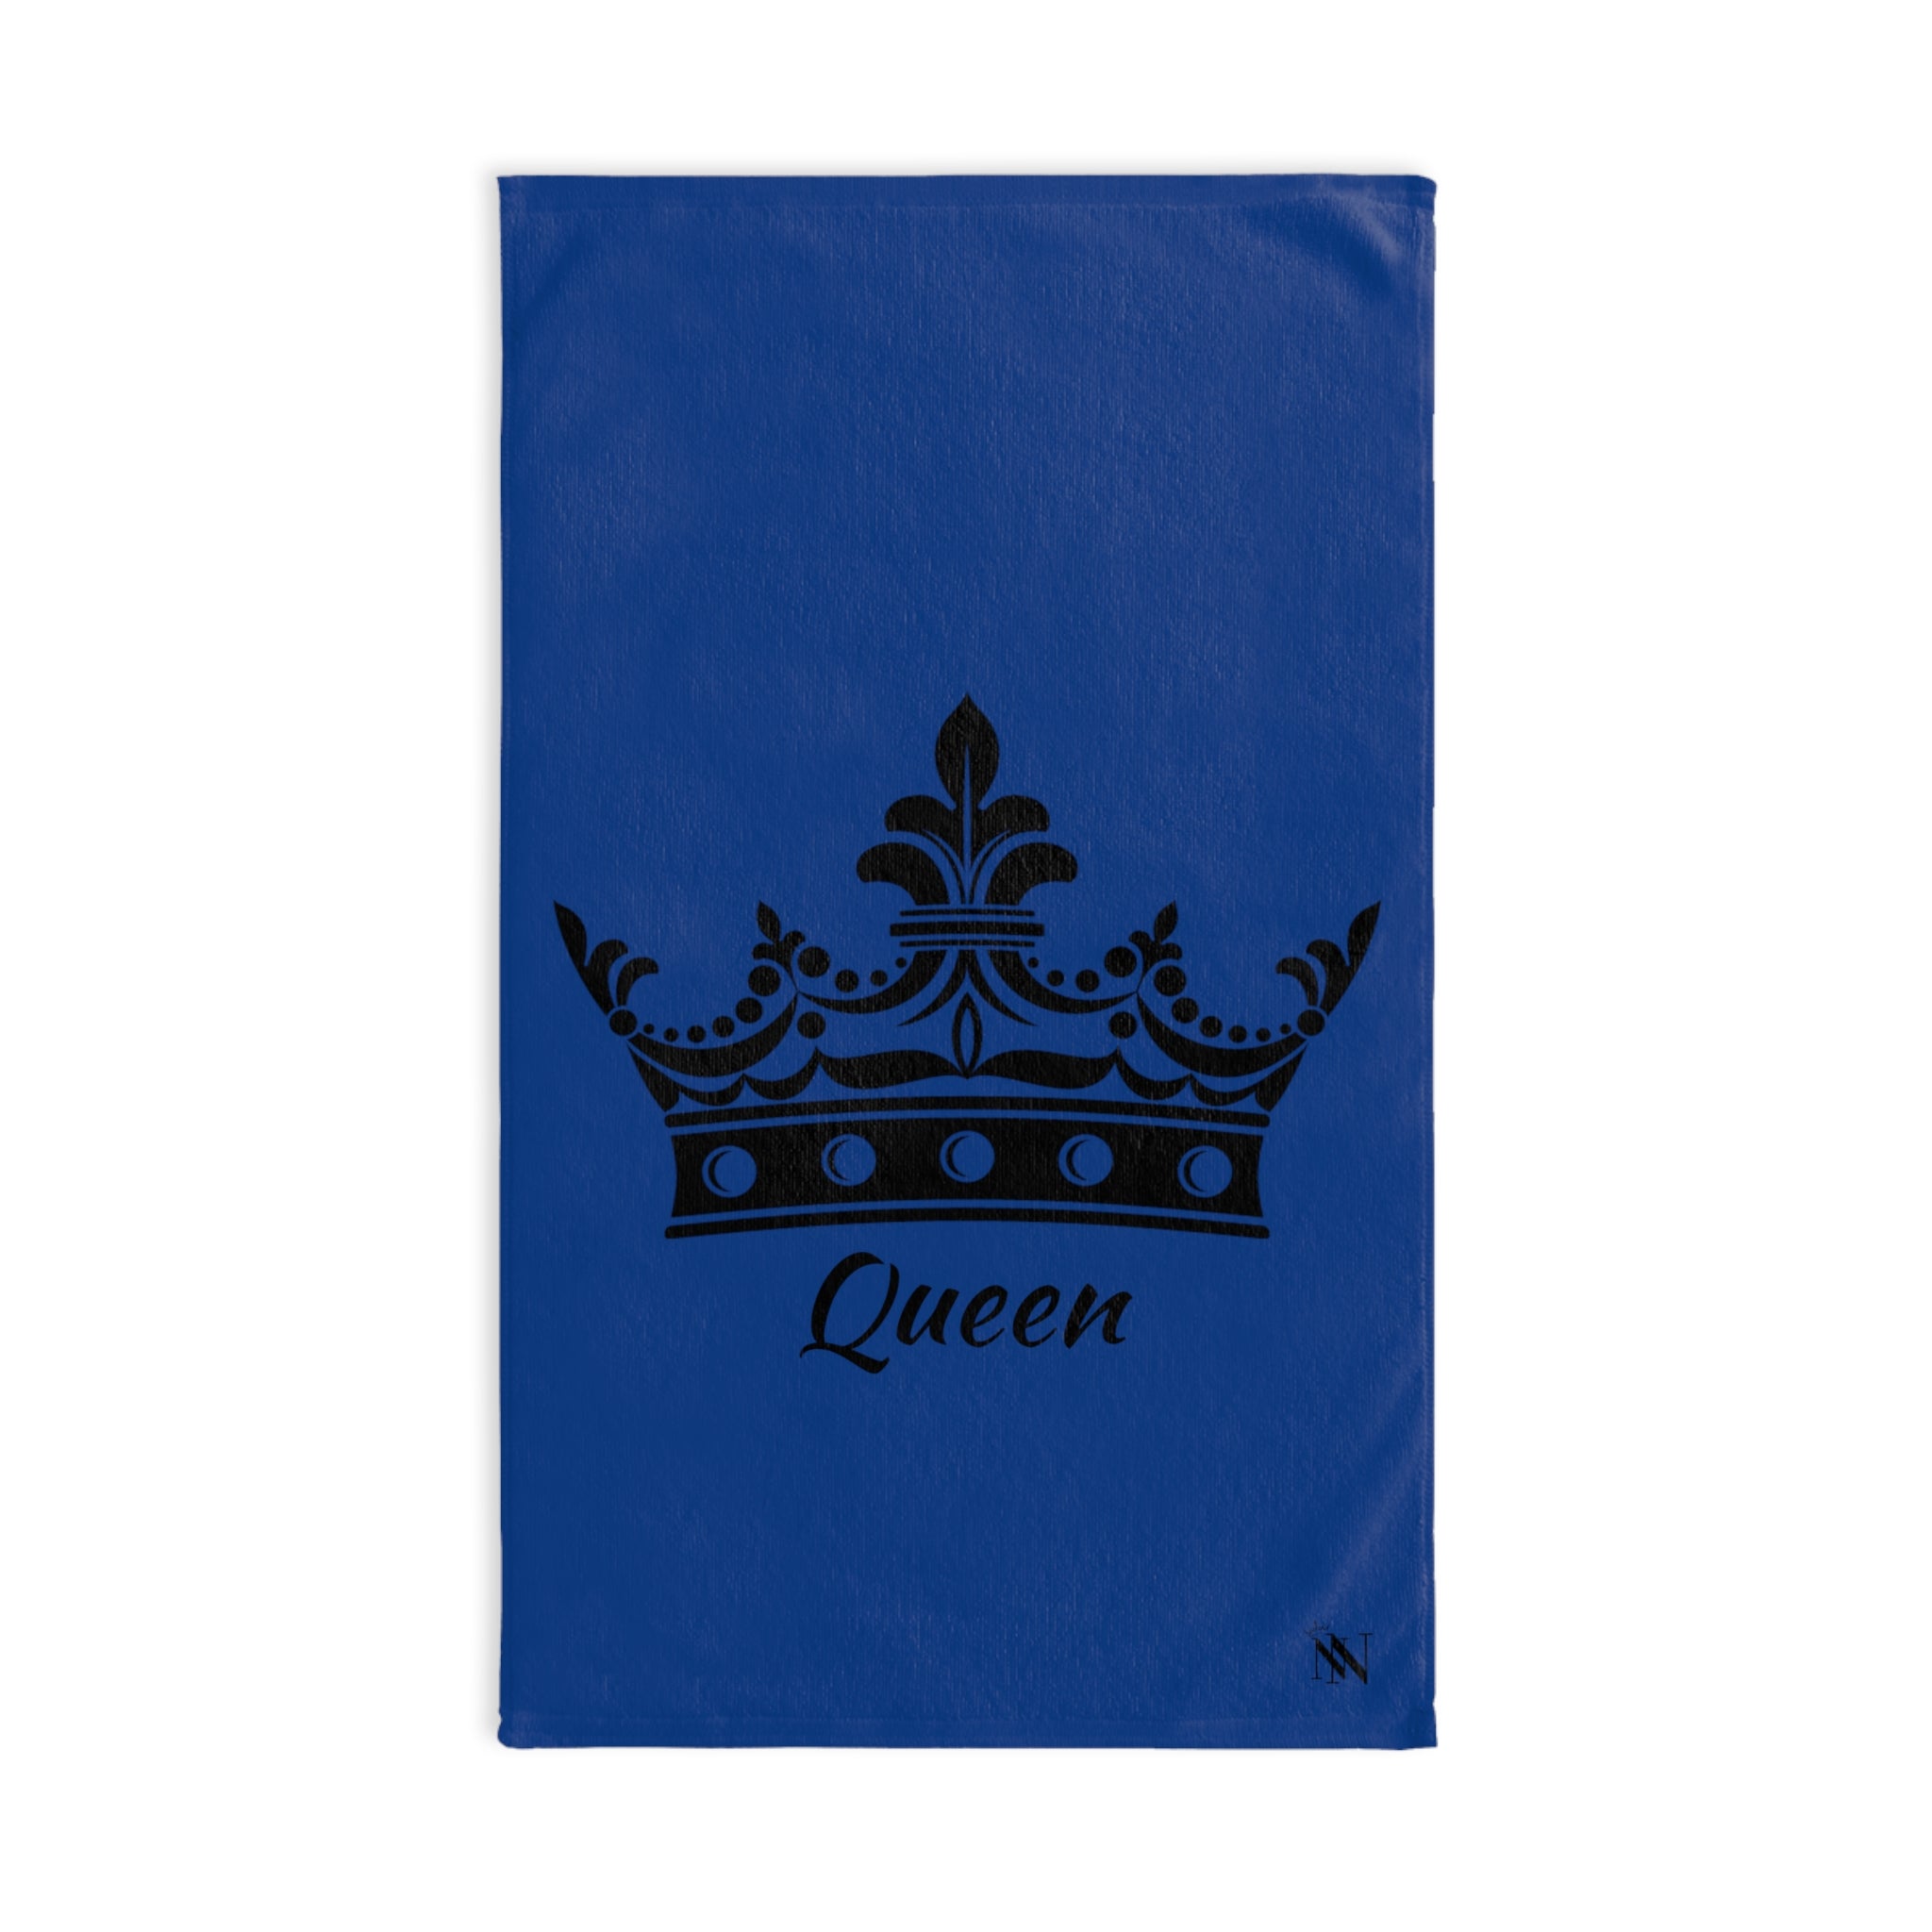 Queen Tiara CrownBlue | Gifts for Boyfriend, Funny Towel Romantic Gift for Wedding Couple Fiance First Year Anniversary Valentines, Party Gag Gifts, Joke Humor Cloth for Husband Men BF NECTAR NAPKINS